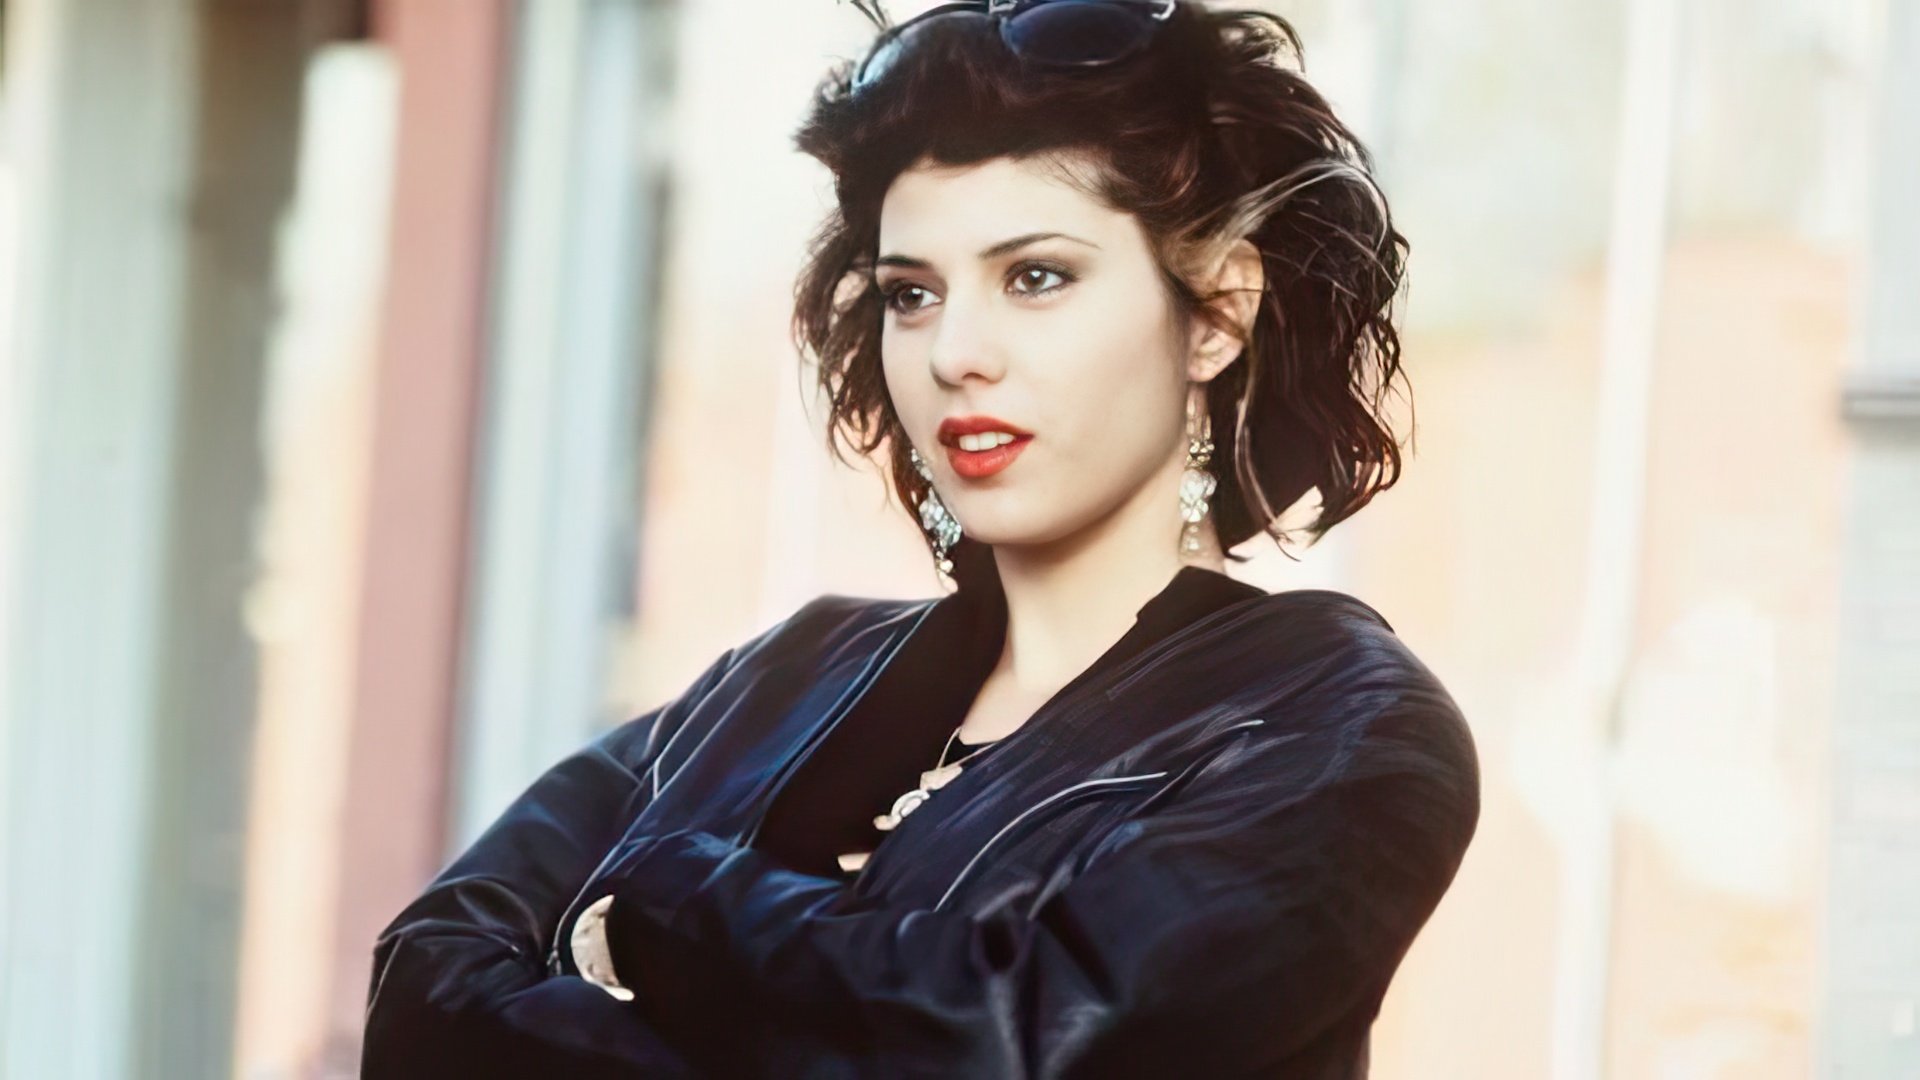 Young Marisa Tomei in the movie 'My Cousin Vinny'